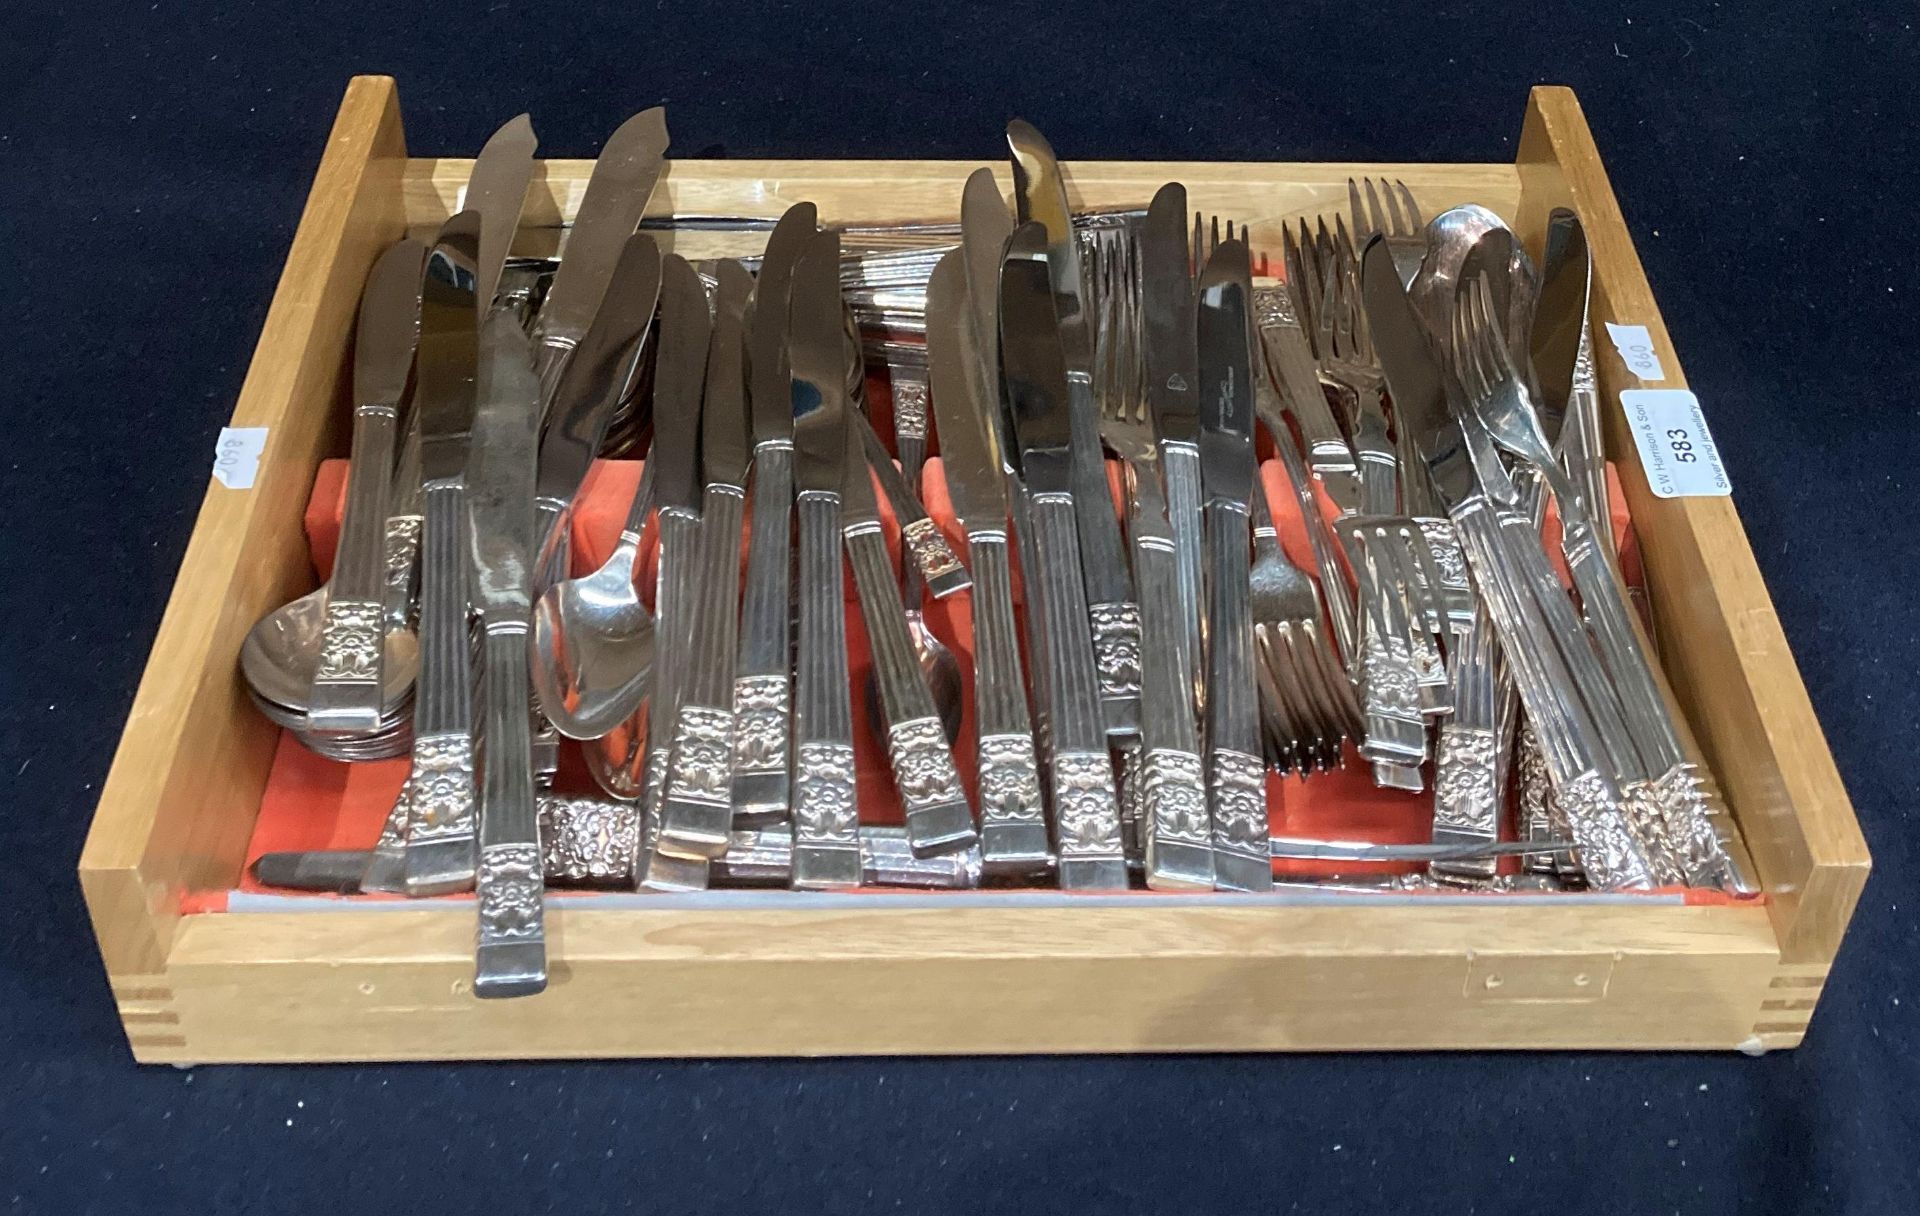 A canteen of cutlery (no lid) containing 112 pieces of Community cutlery.